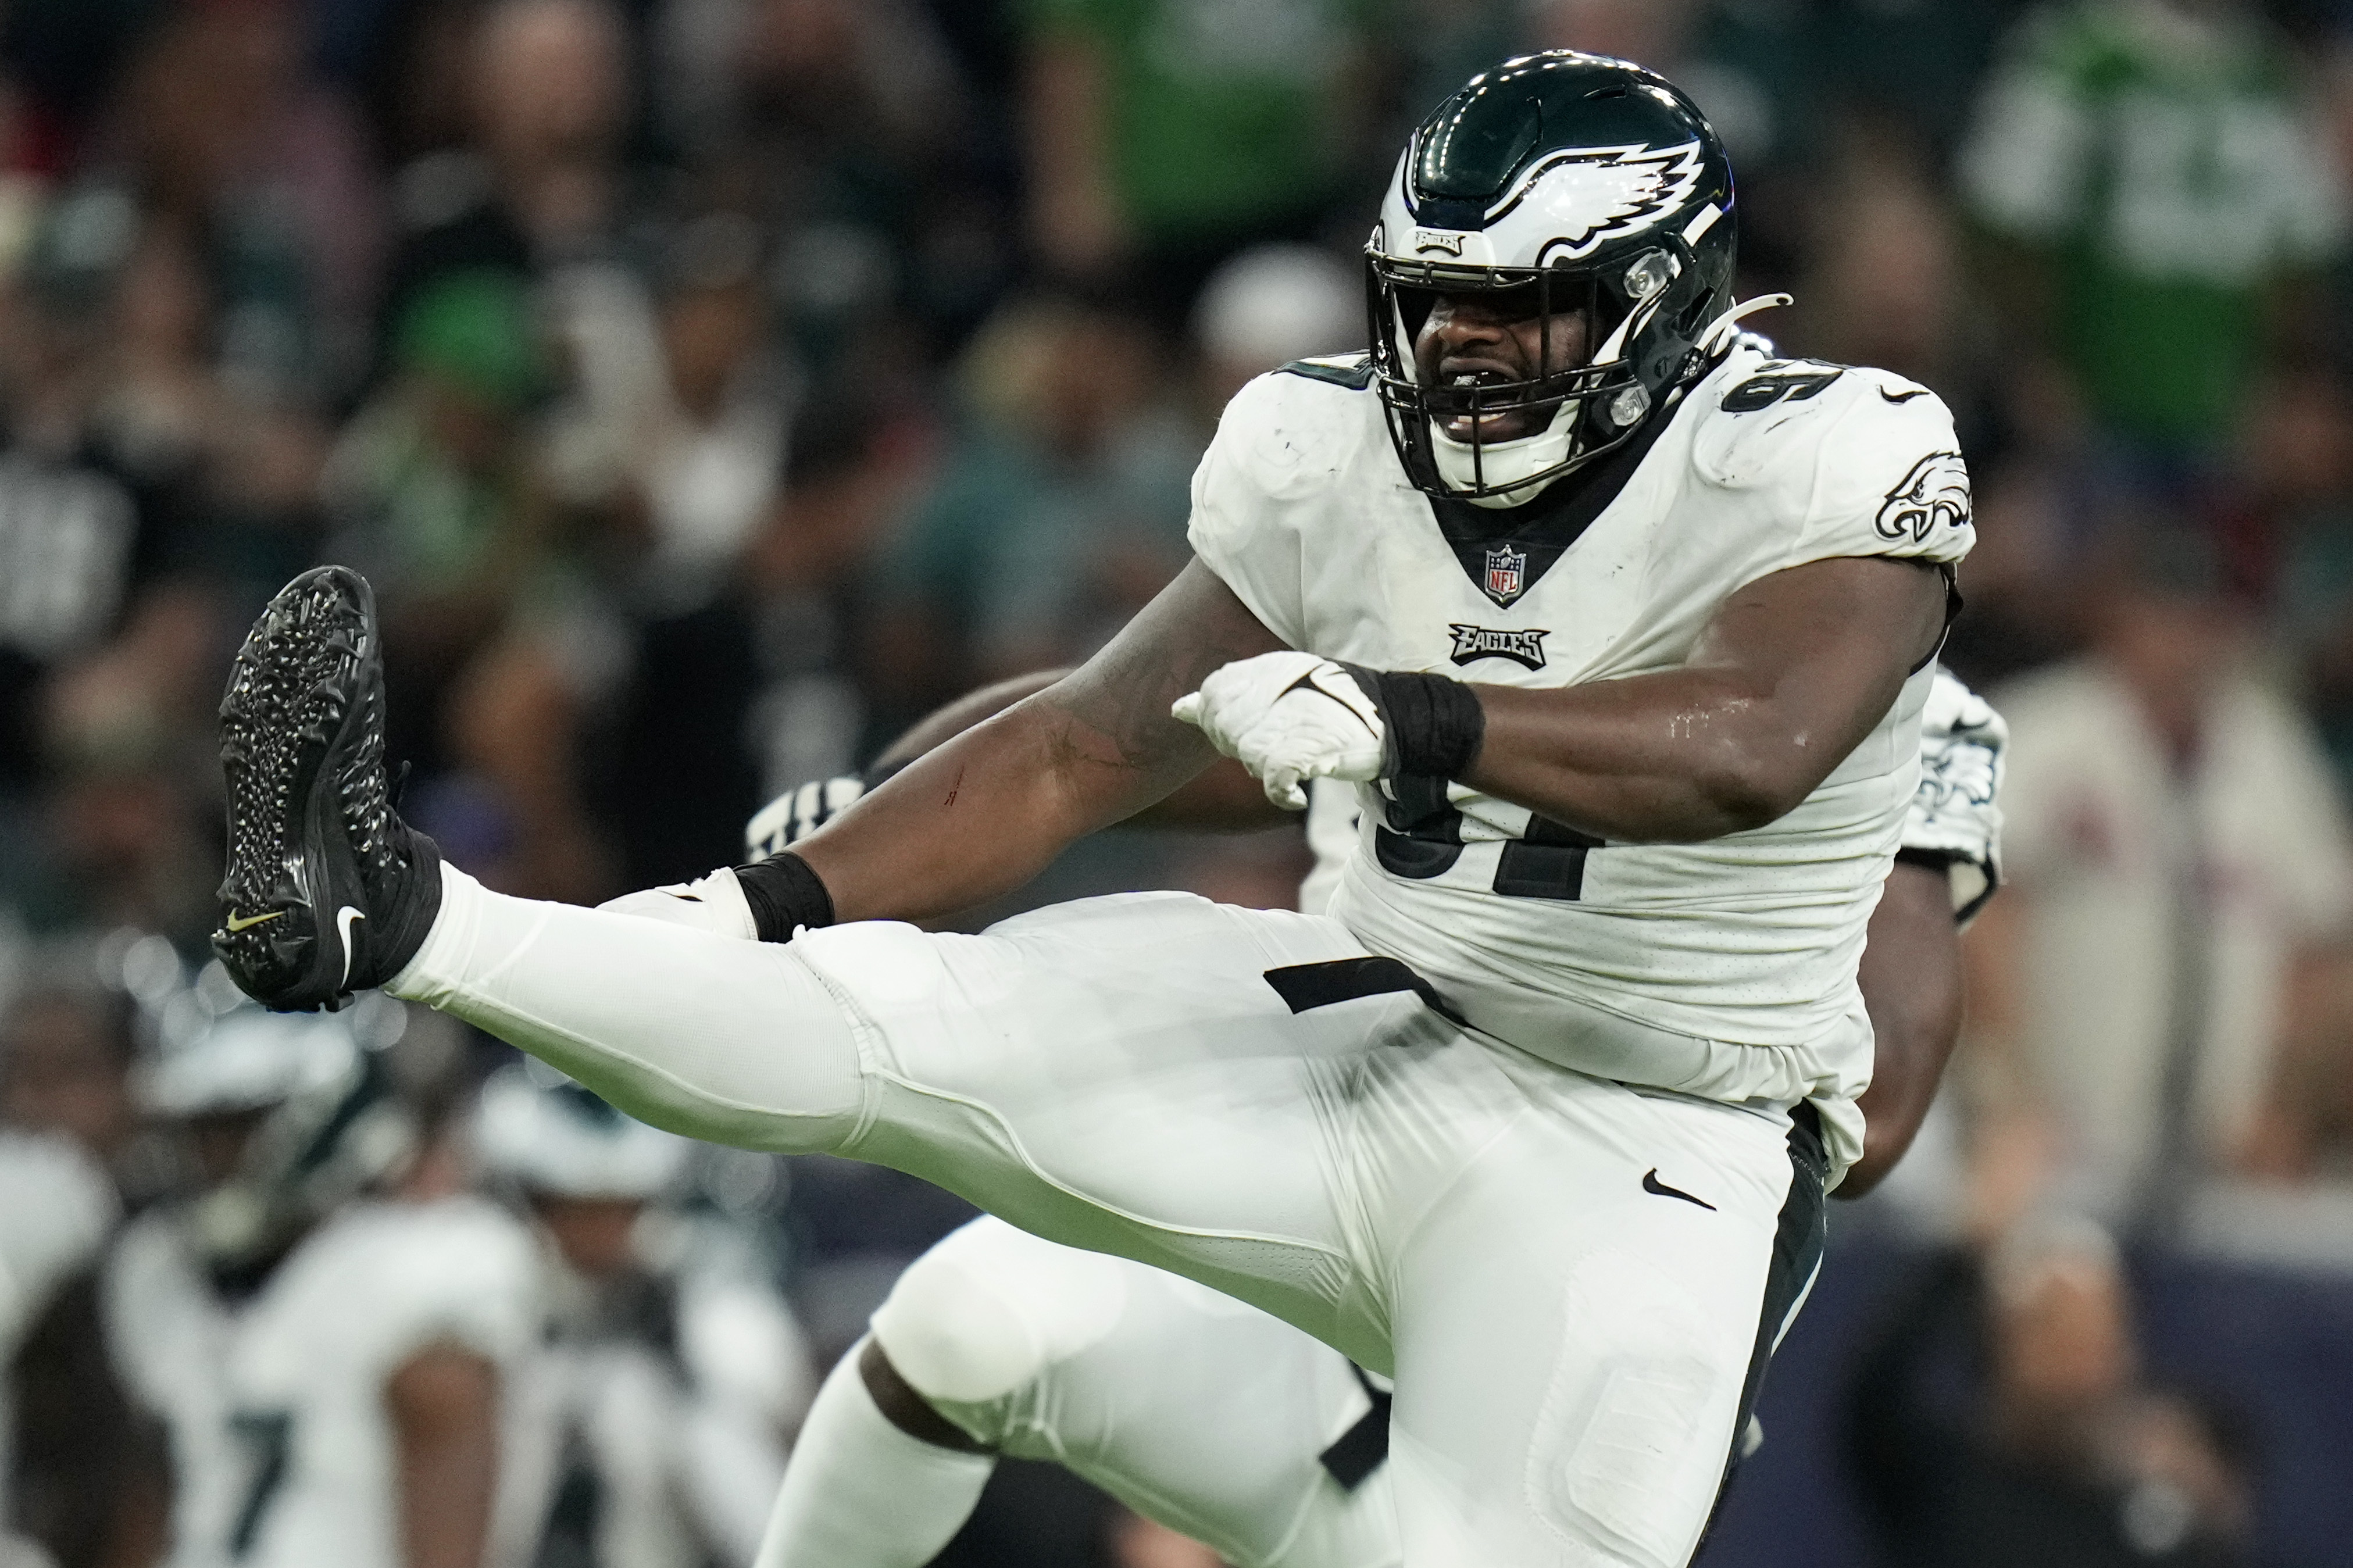 Ex-Eagles star Javon Hargrave: It was 'shocking' that 49ers wanted me 